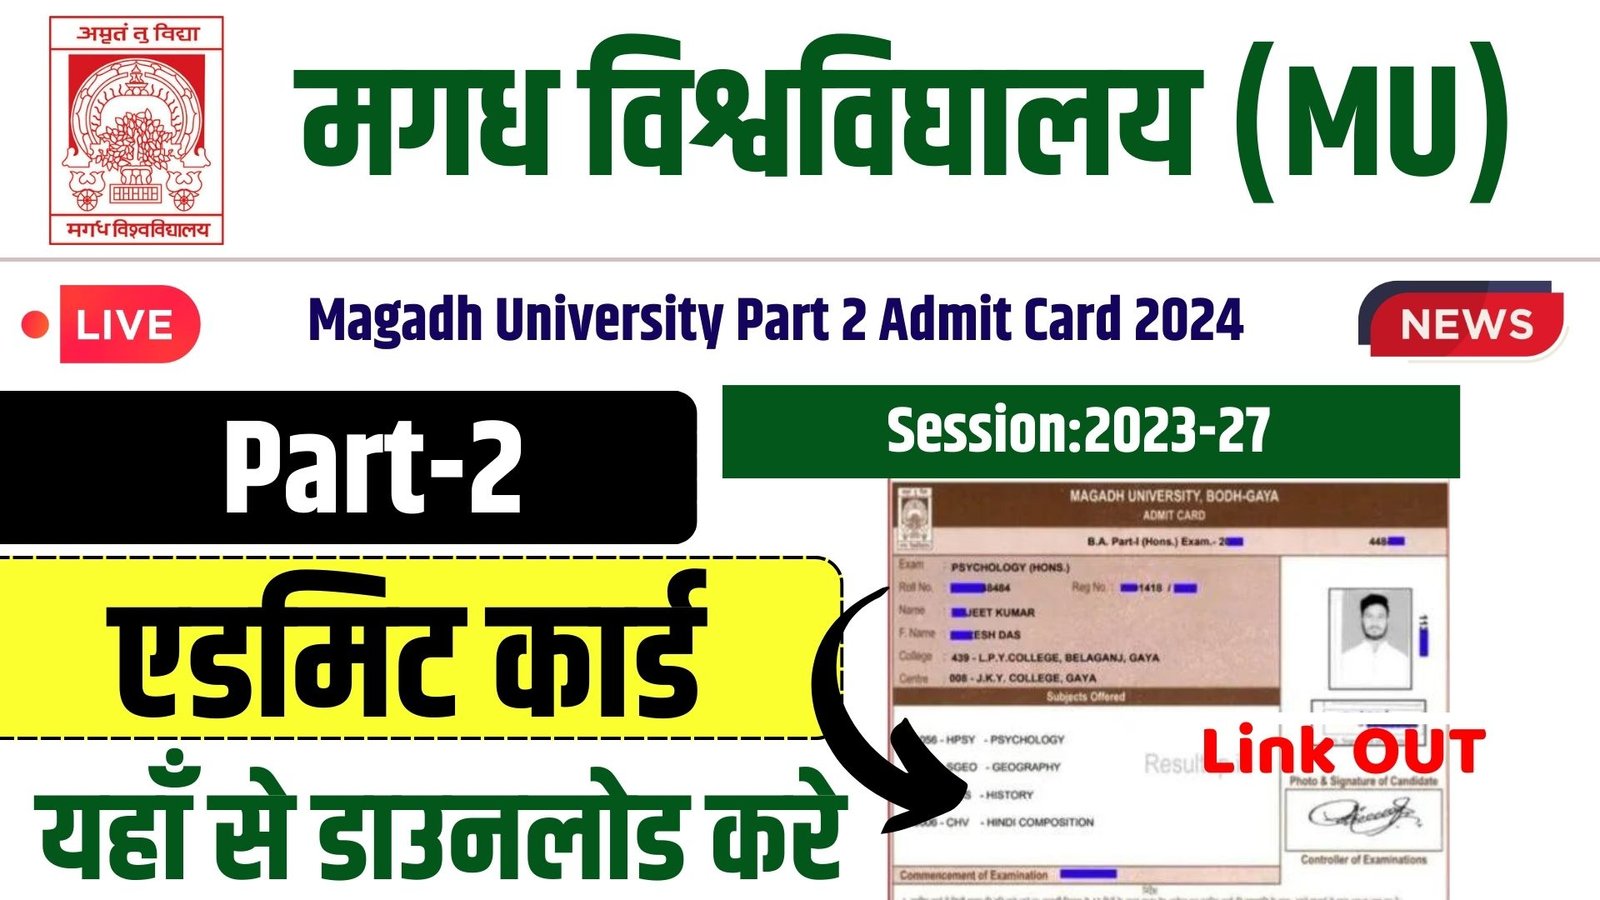 Magadh University Part 2 Admit Card 2024 Download Link (Session:2023-27) For Semester 2 B.A, B.Sc and B.Com